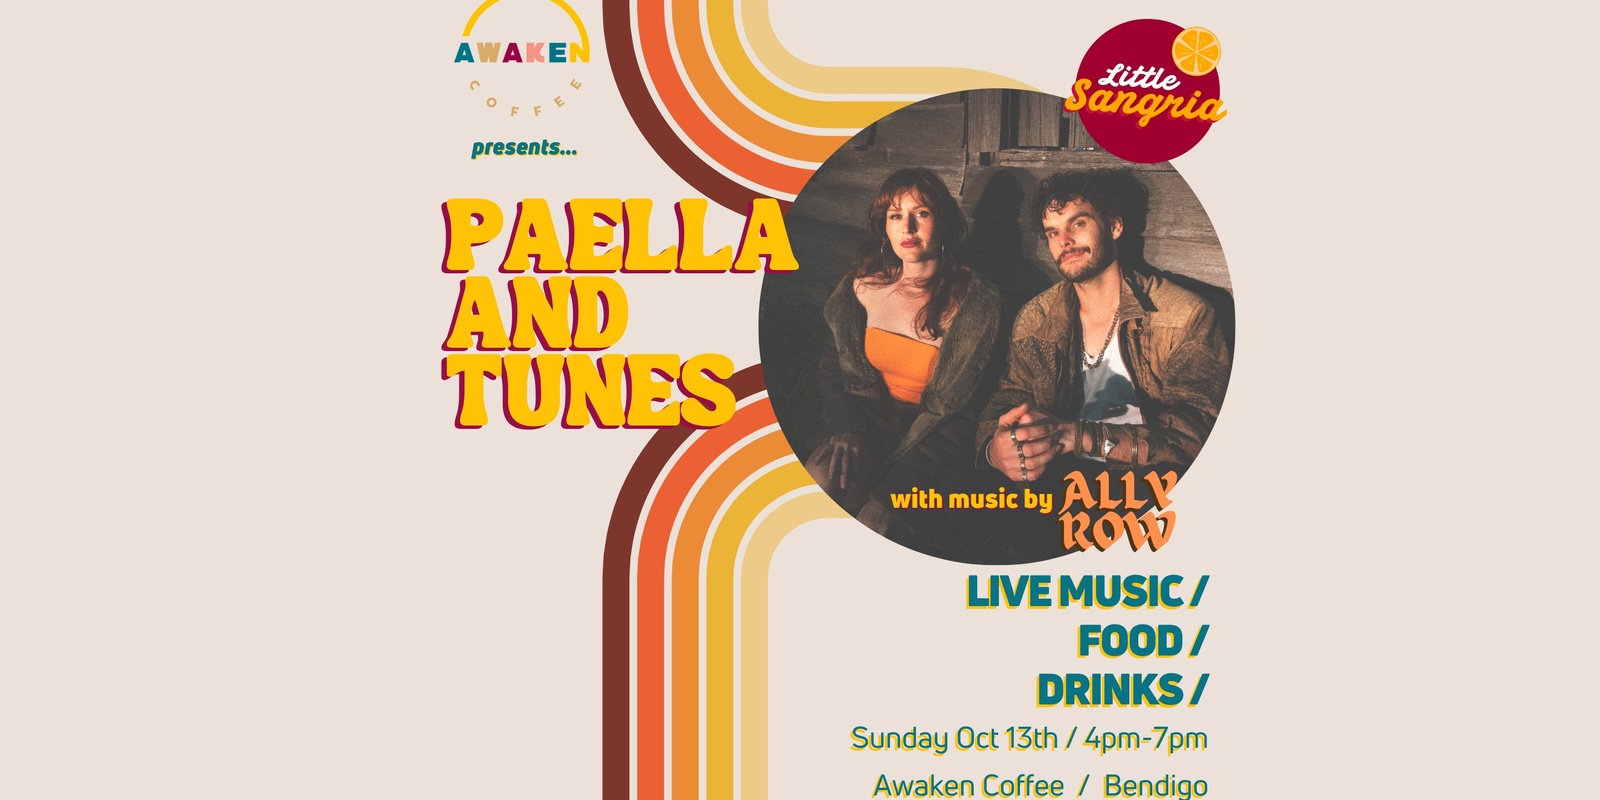 Banner image for Awaken Coffee presents Paella and Tunes with music by Ally Row 